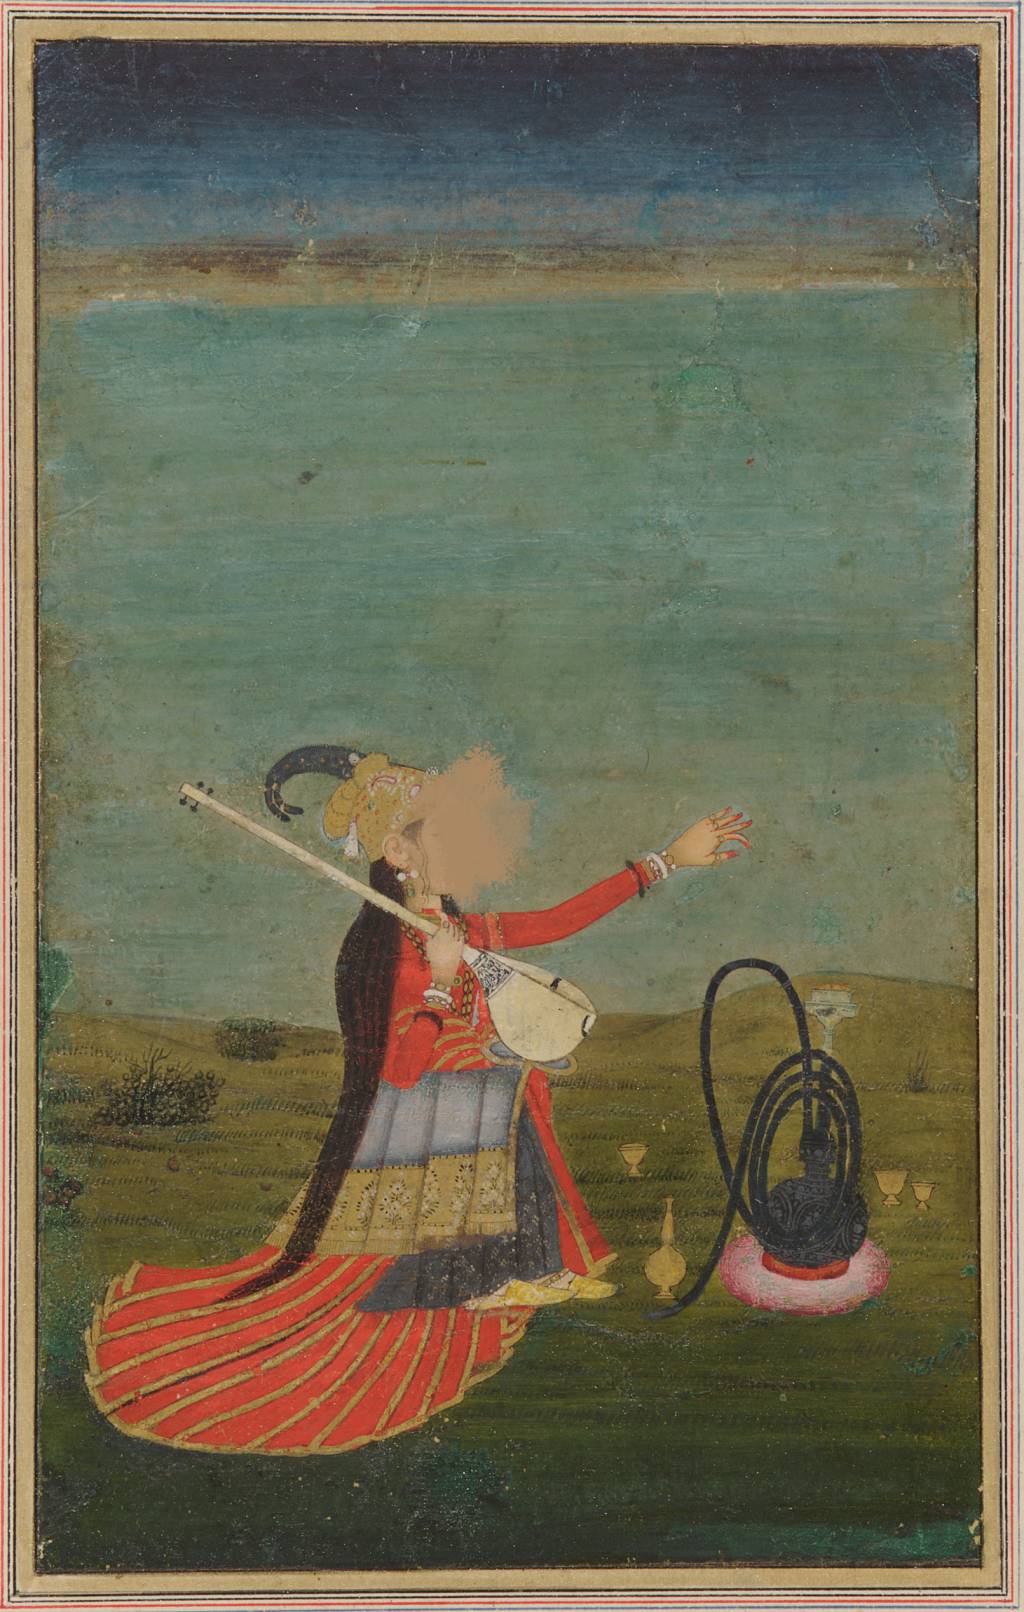 Smithsonian Asian Museum, south Asia collection – Mulher artista with tanpura